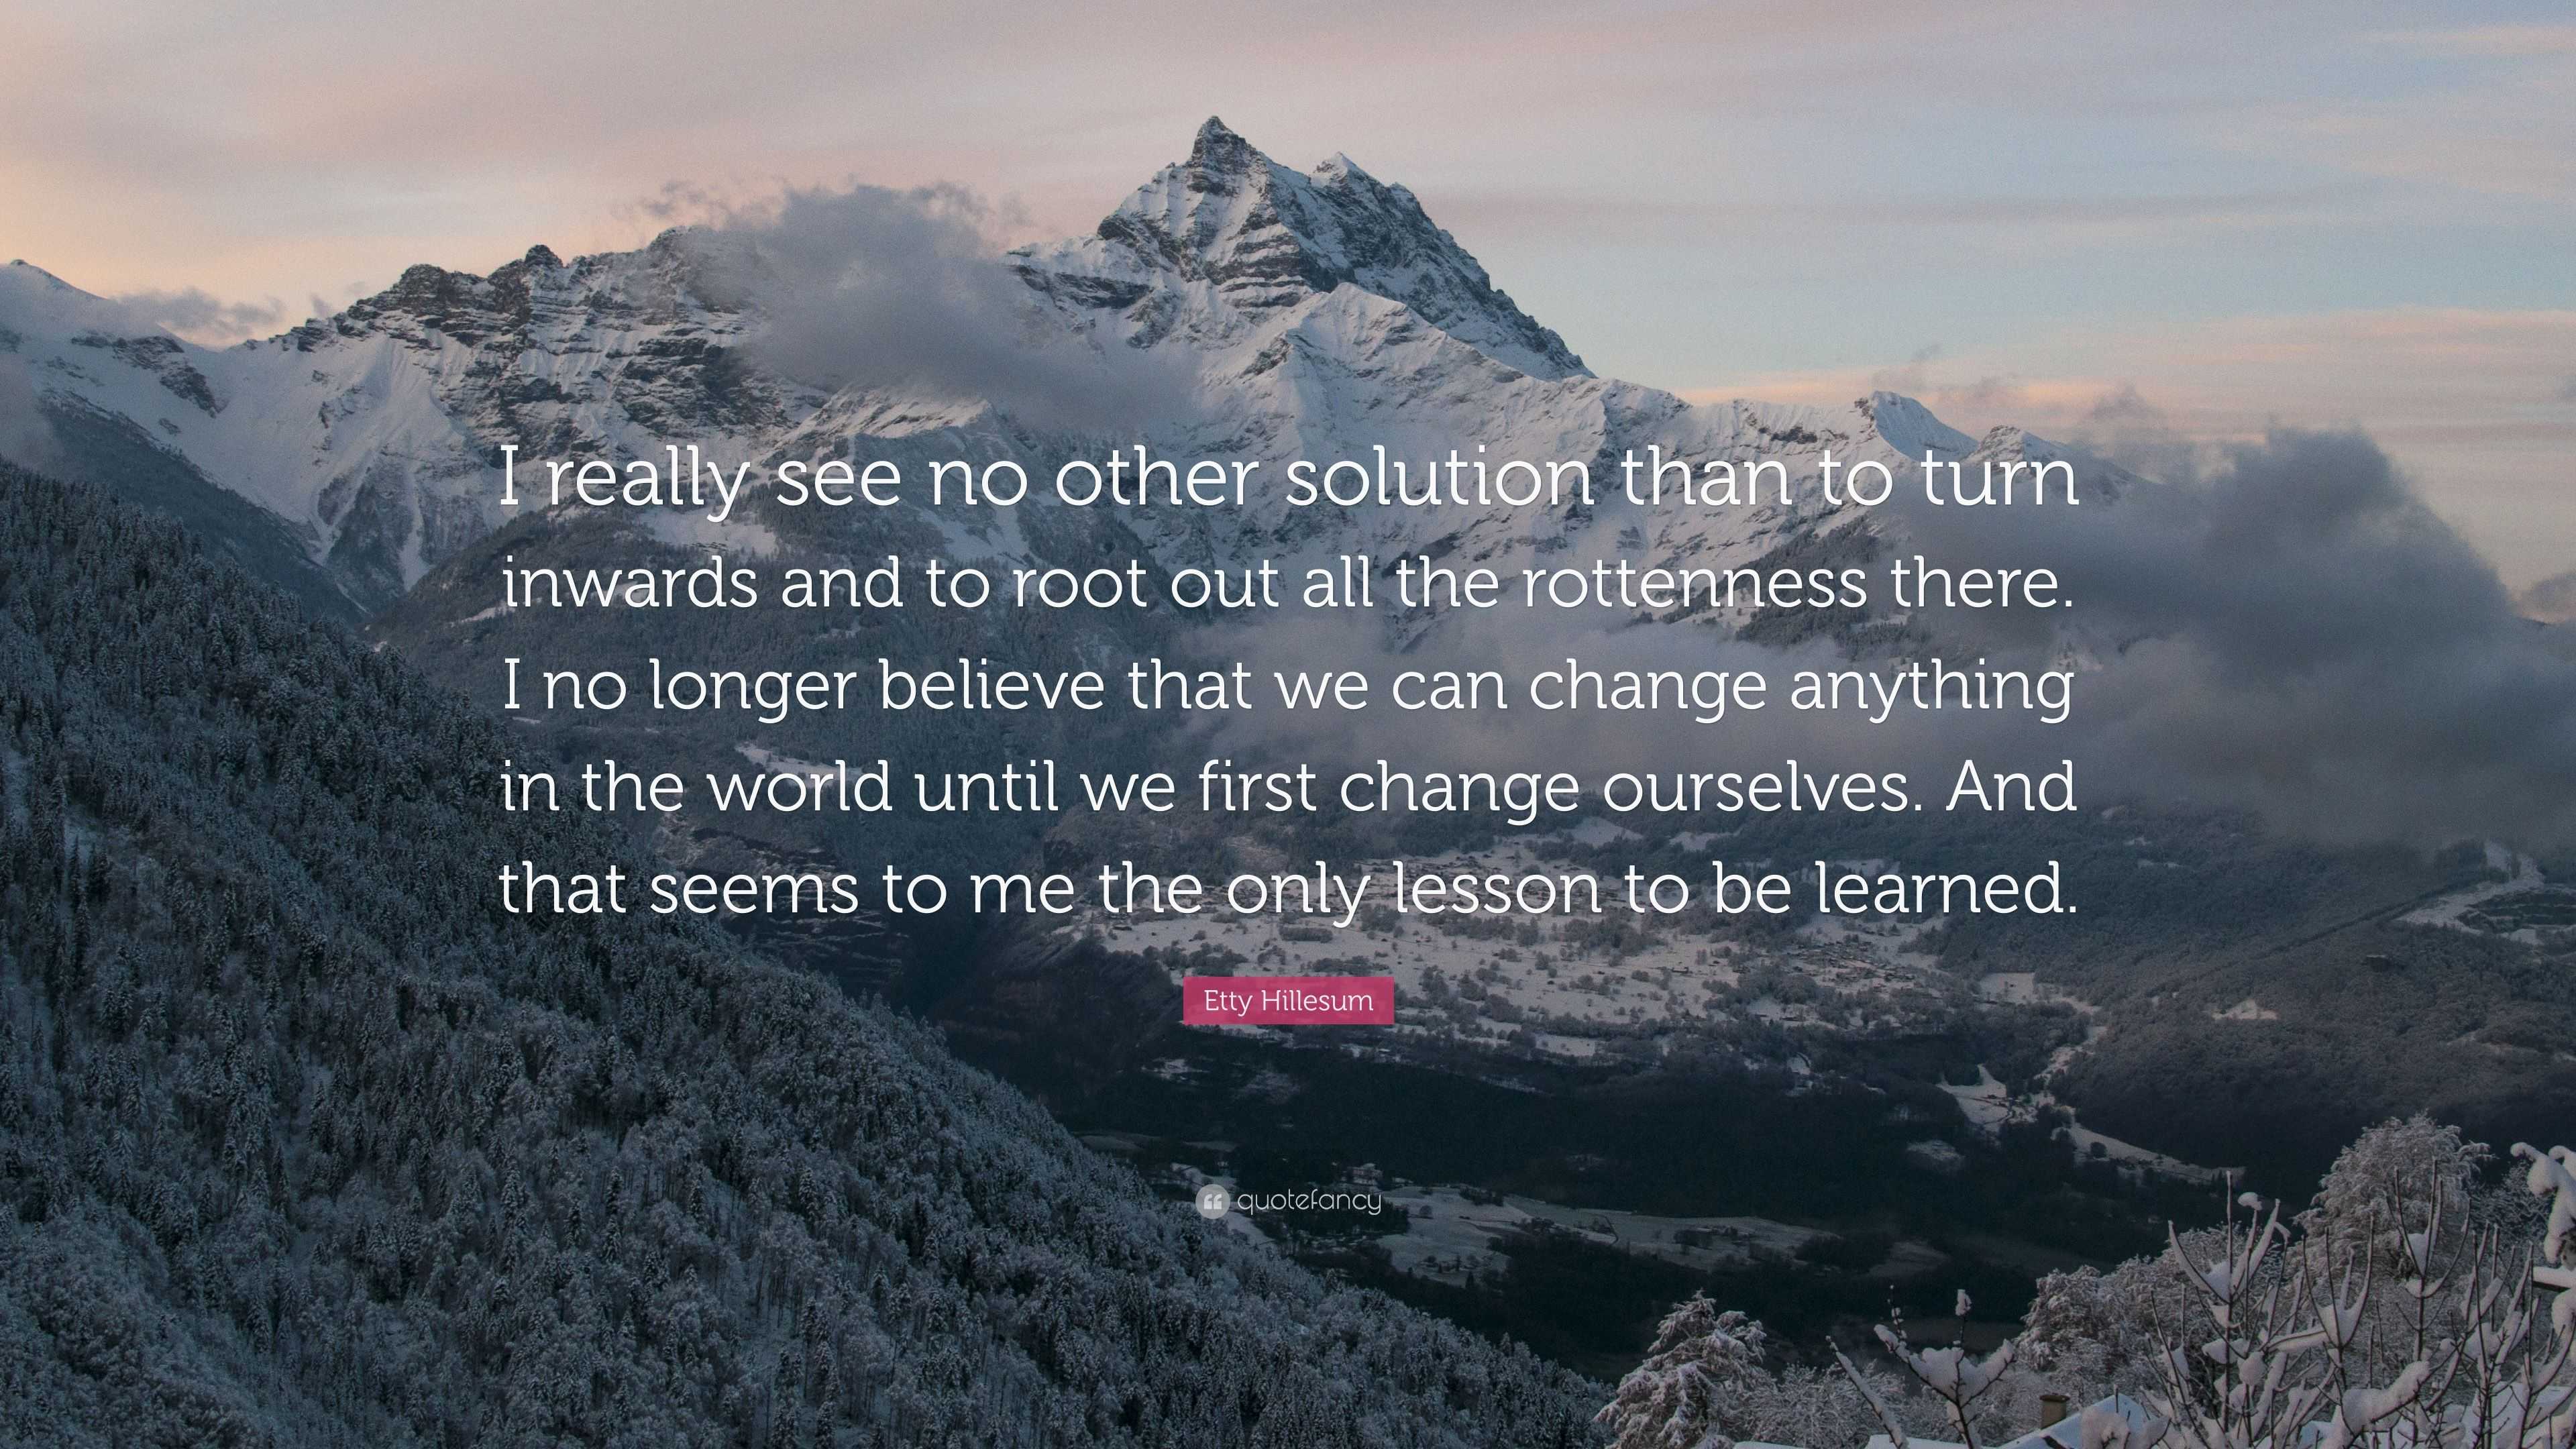 Etty Hillesum Quote “I really see no other solution than to turn